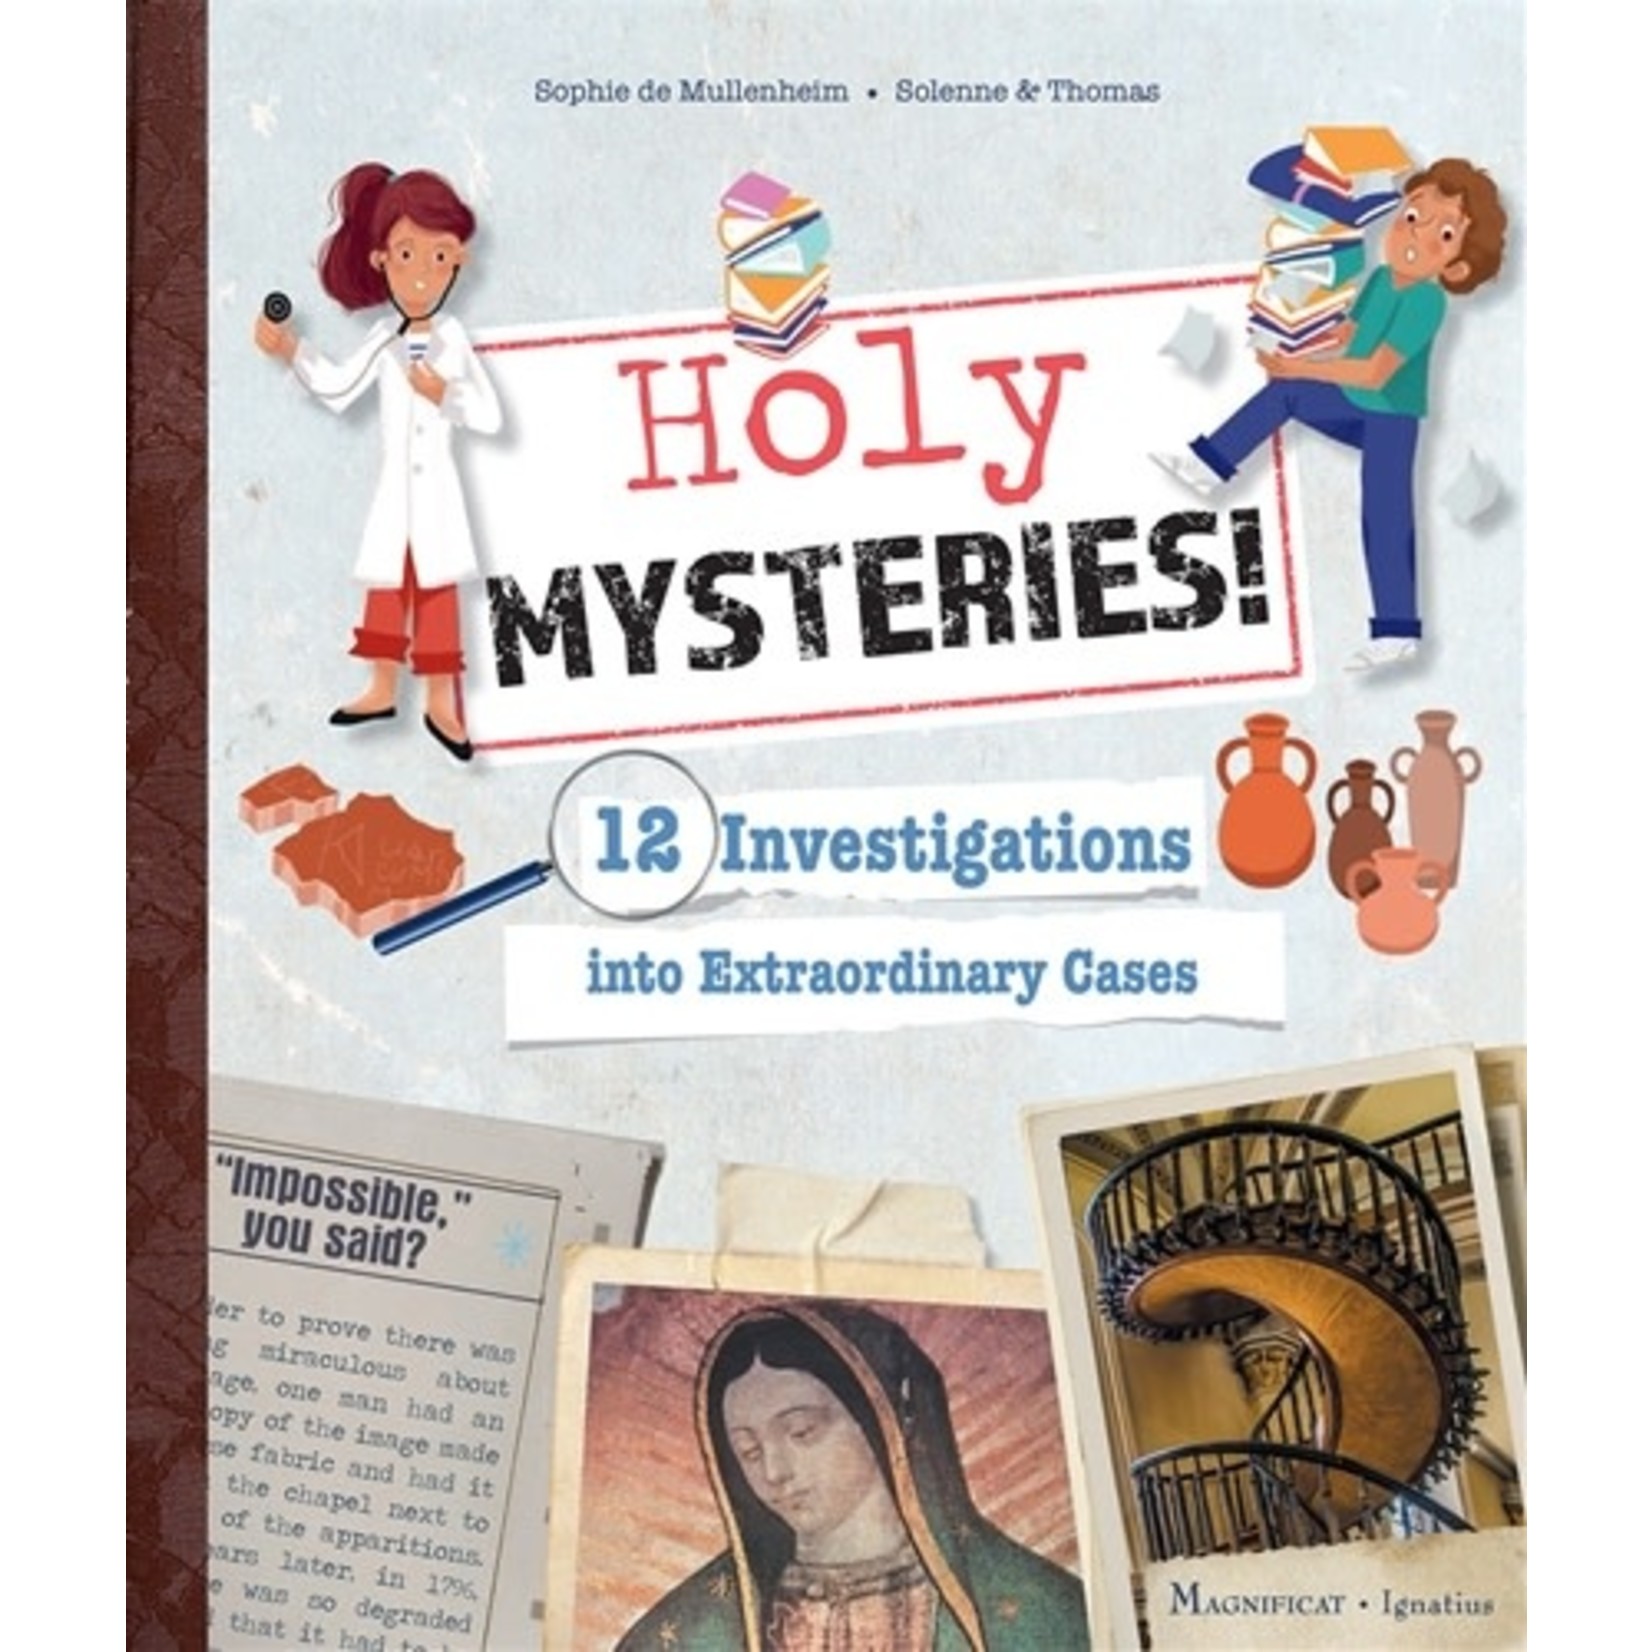 Holy Mysteries!